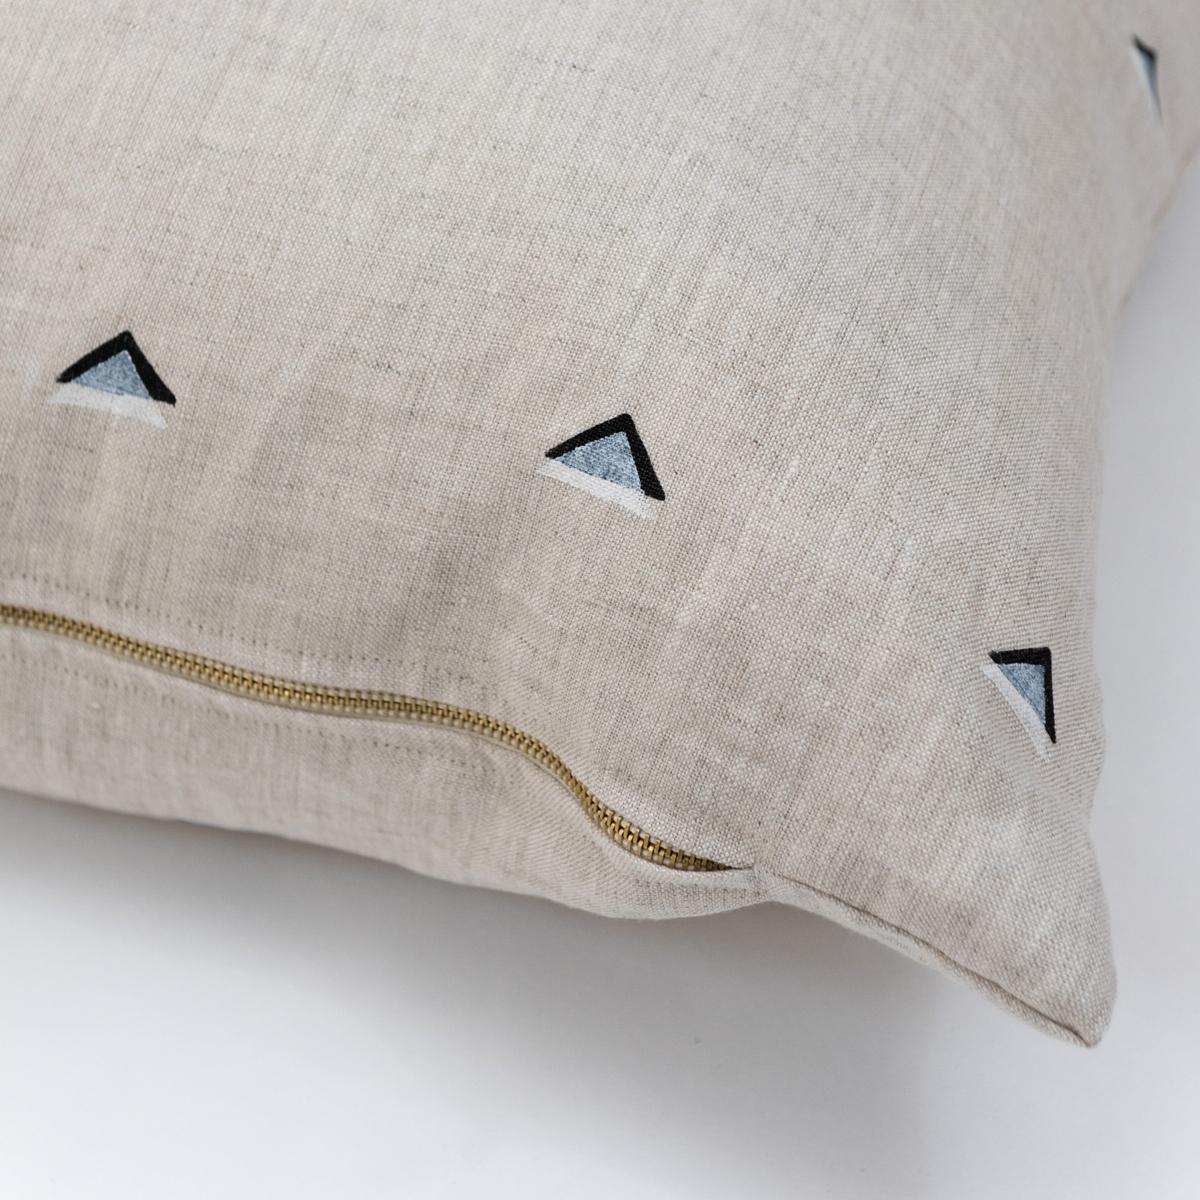 American Overlapping Triangles Pillow 22